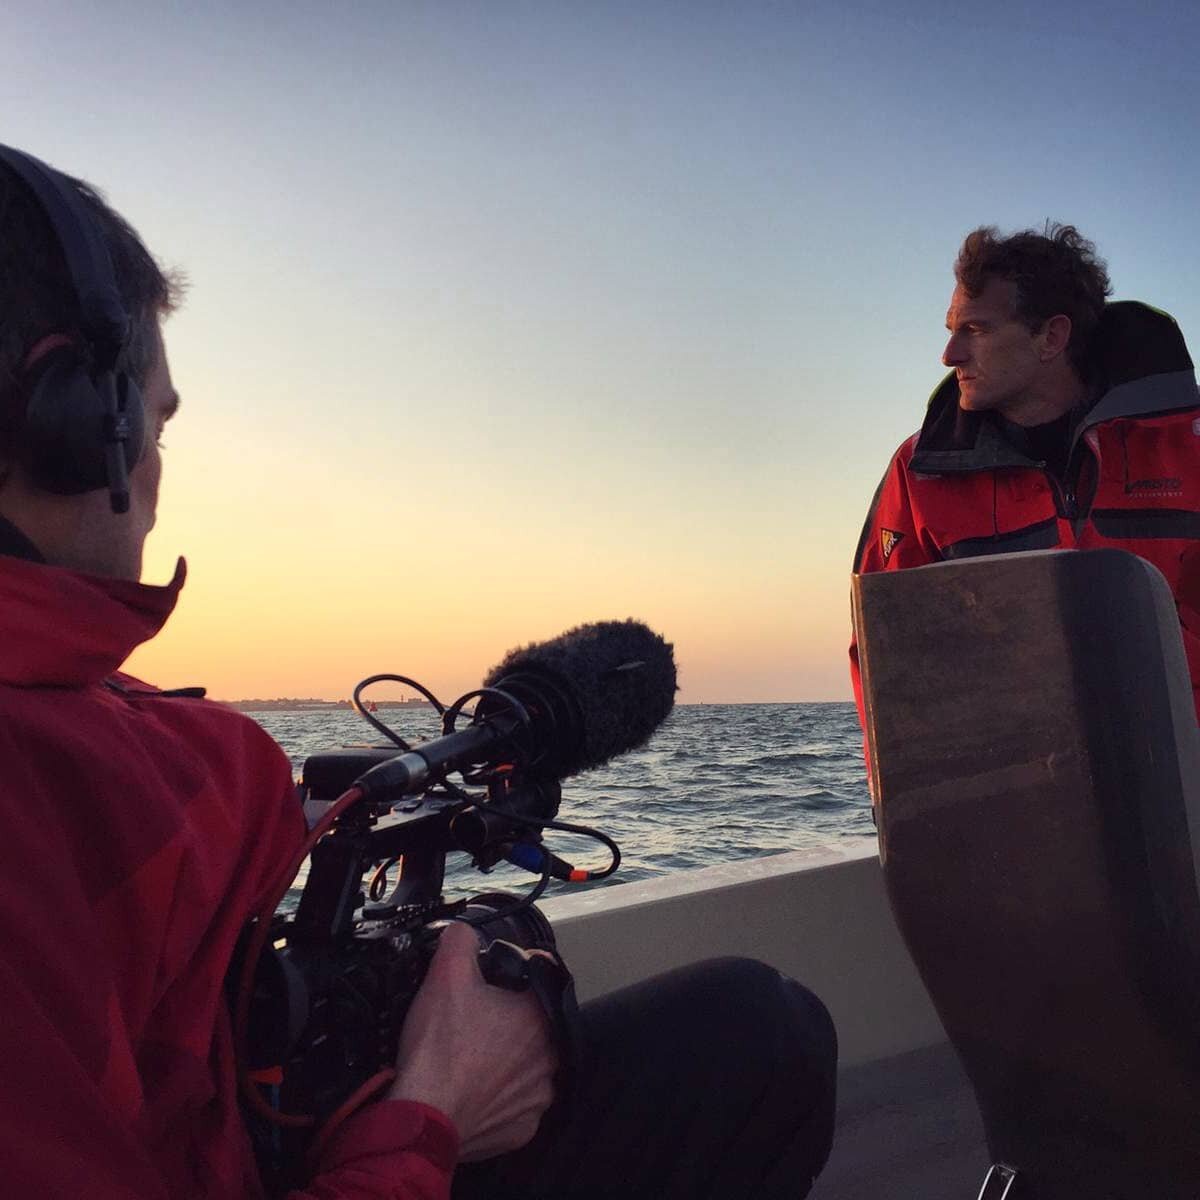 Sunrise on the Solent. Shooting the legendary Dan Snow for ace director Mark Edger on the History Hit documentary about the Bismarck. 

More to come soon - unsinkable! 

#historyhittv #dansnow #bismarck #documentaryfilm #sunrise #dop #solent  #videop